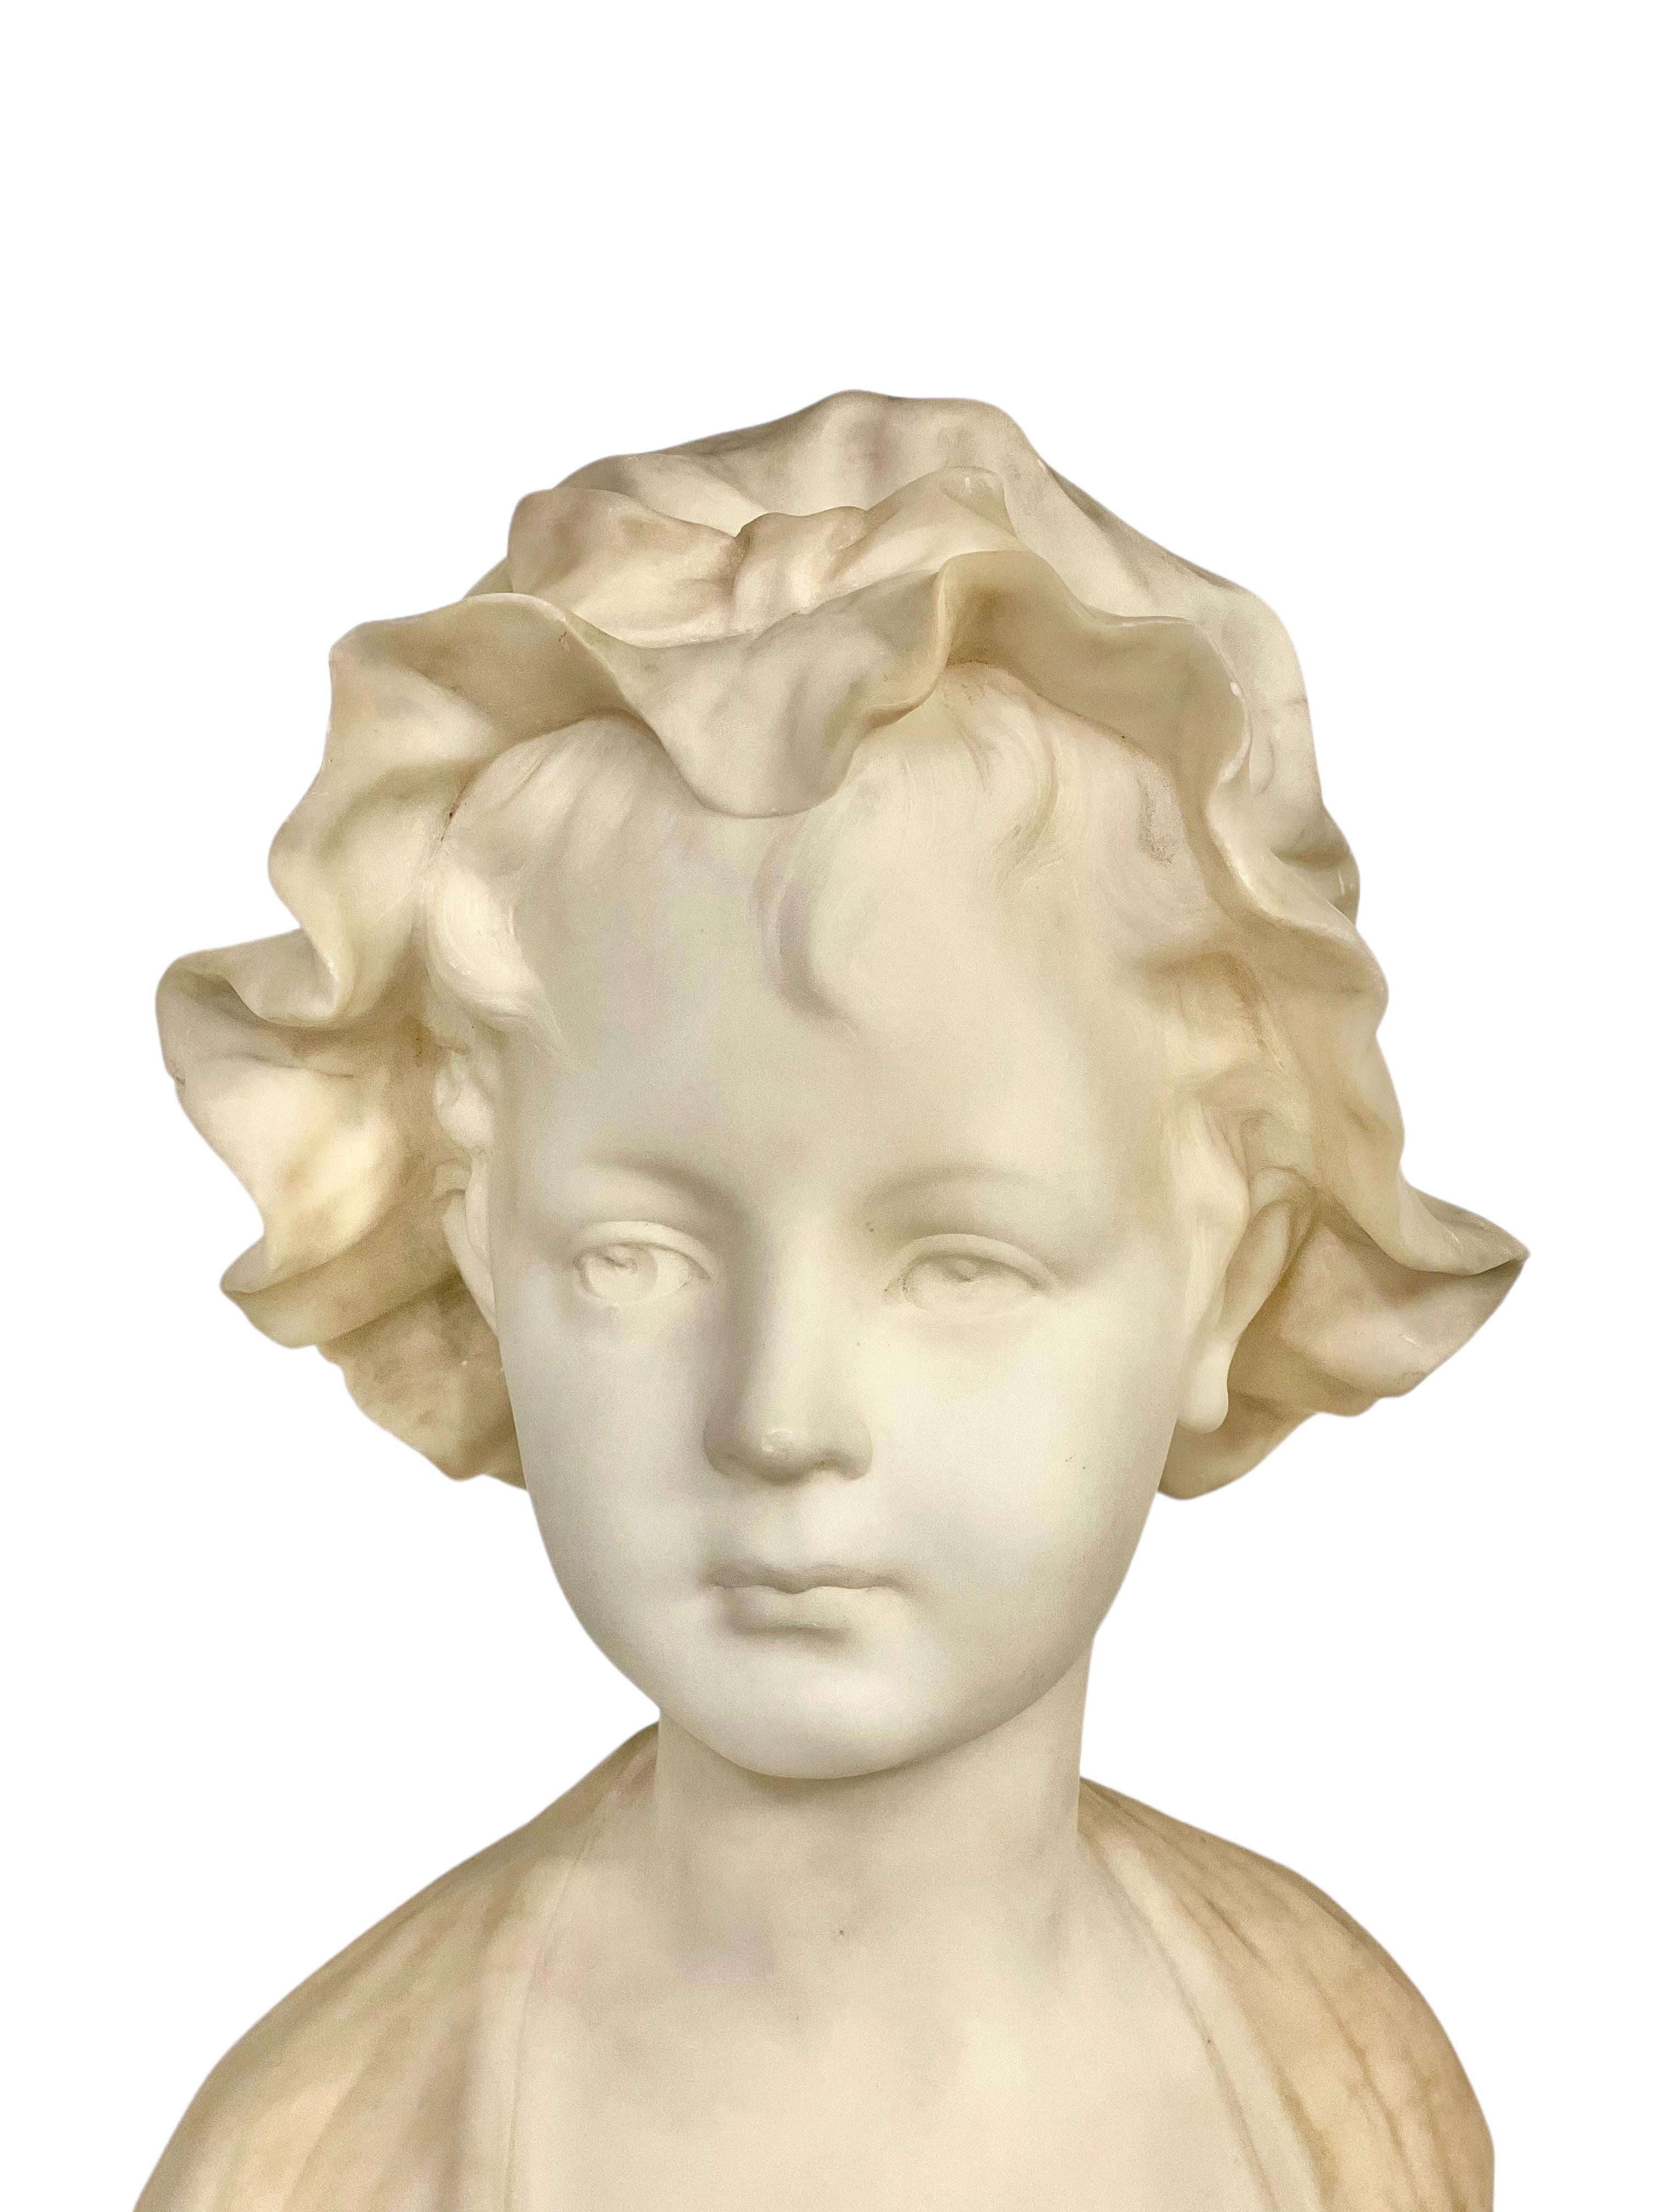 This 19th-century alabaster bust portrays a charming young girl with an exquisite profile. The statue, crafted in a pristine white hue, captures the innocence and grace of youth. The intricately veined gray bonnet, crowned with a neatly tied bow,